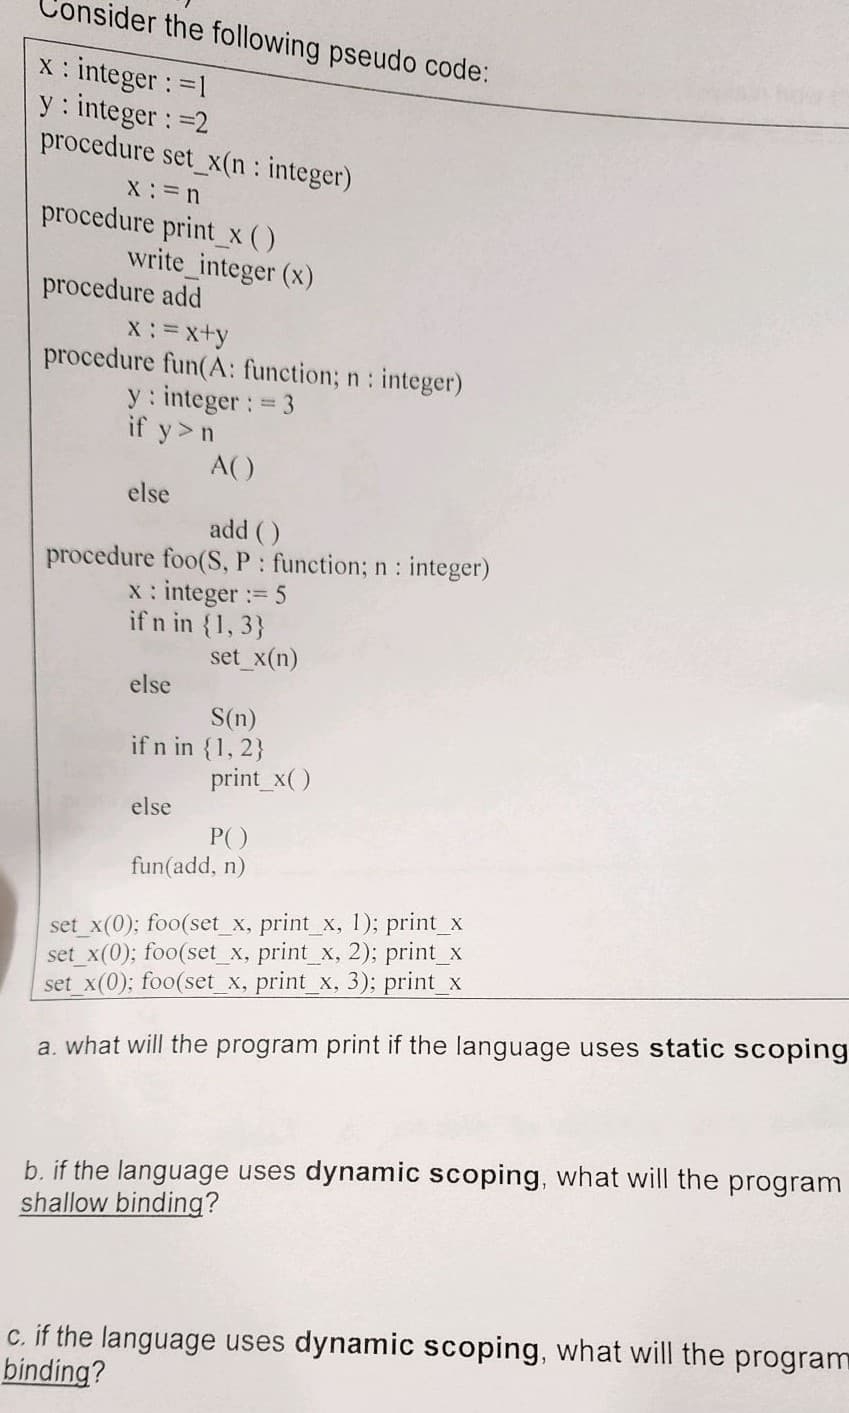 sider the following pseudo code:
x : integer : =1
y: integer : =2
procedure set_x(n: integer)
X:=n
procedure print_x ( )
write_integer (x)
procedure add
x :=x+y
procedure fun(A: function; n: integer)
y: integer : = 3
if y>n
else
add ()
procedure foo(S, P: function; n: integer)
x : integer := 5
if n in {1,3}
else
A()
else
set_x(n)
S(n)
if n in {1, 2}
print_x()
P()
fun(add, n)
set_x(0); foo(set_x, print_x, 1); print_x
set_x(0); foo(set_x, print_x, 2); print_x
set_x(0); foo(set_x, print_x, 3); print_x
a. what will the program print if the language uses static scoping
b. if the language uses dynamic scoping, what will the program
shallow binding?
c. if the language uses dynamic scoping, what will the program
binding?